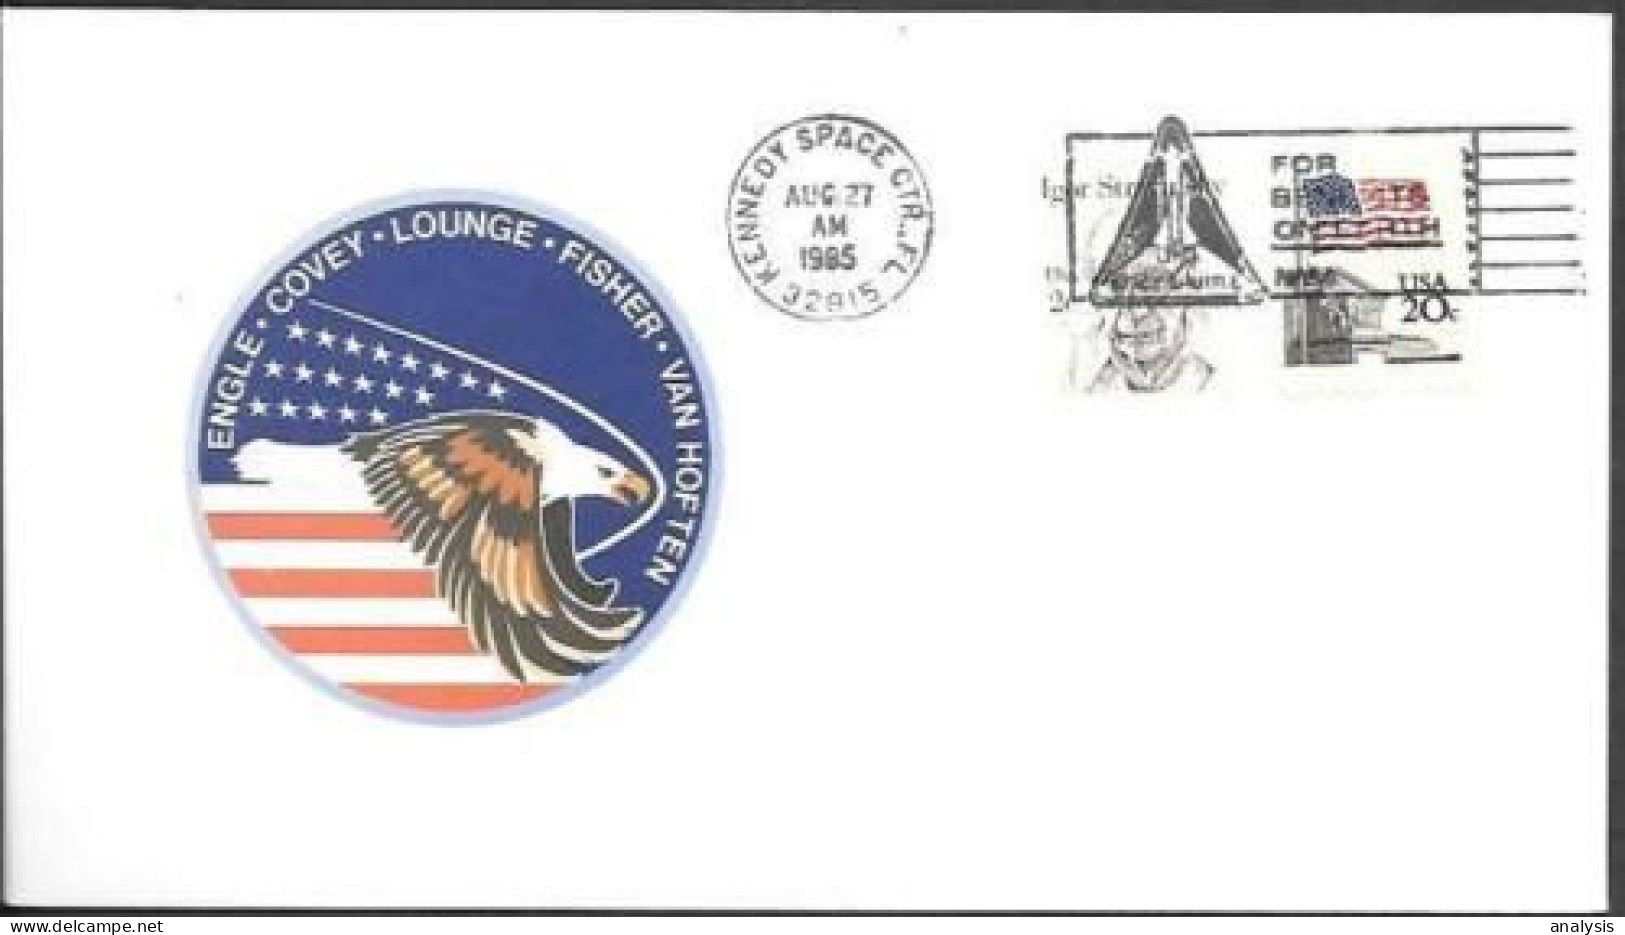 US Space Cover 1985. Discovery STS-51I Launch. KSC - Etats-Unis